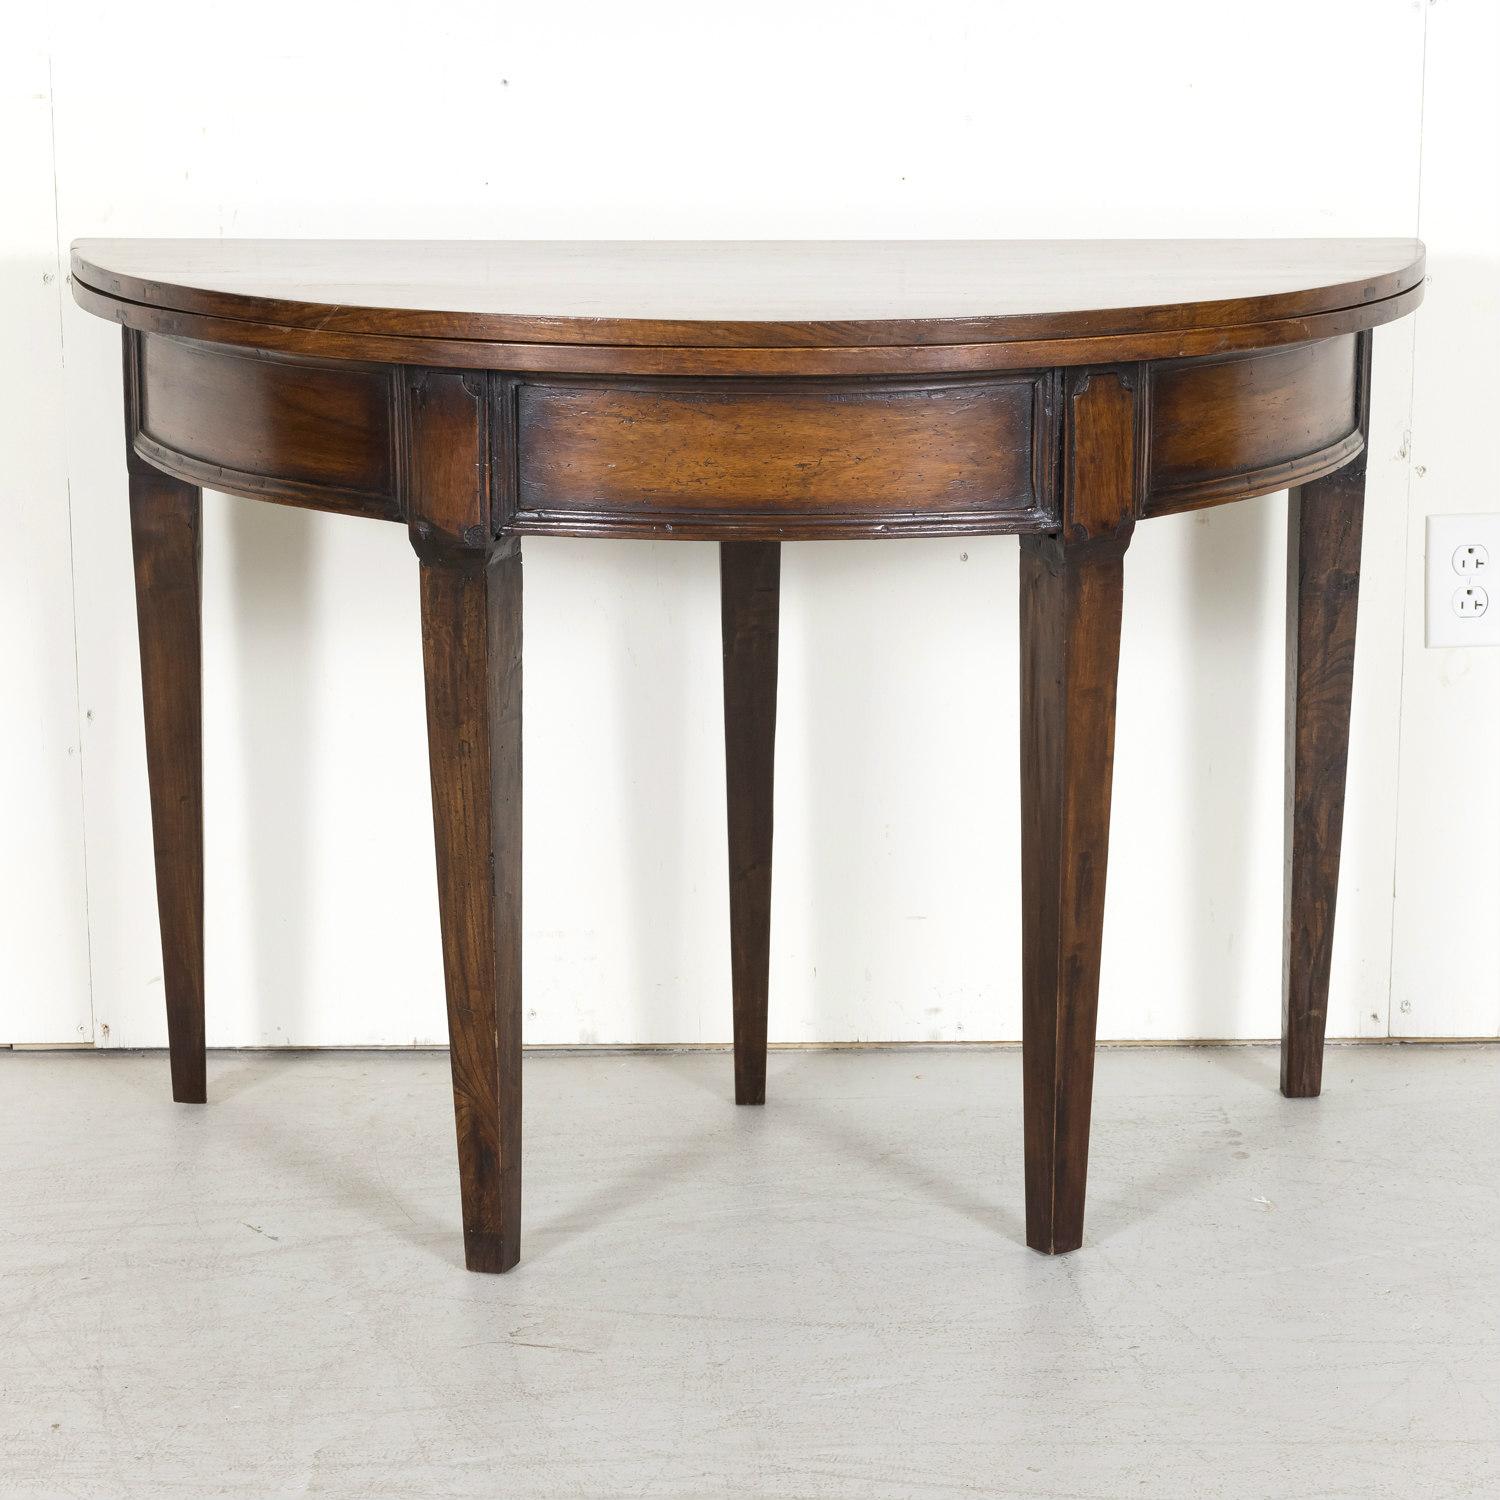 Late 19th Century 19th Century French Louis XVI Style Walnut Demilune Wall Console or Side Table For Sale